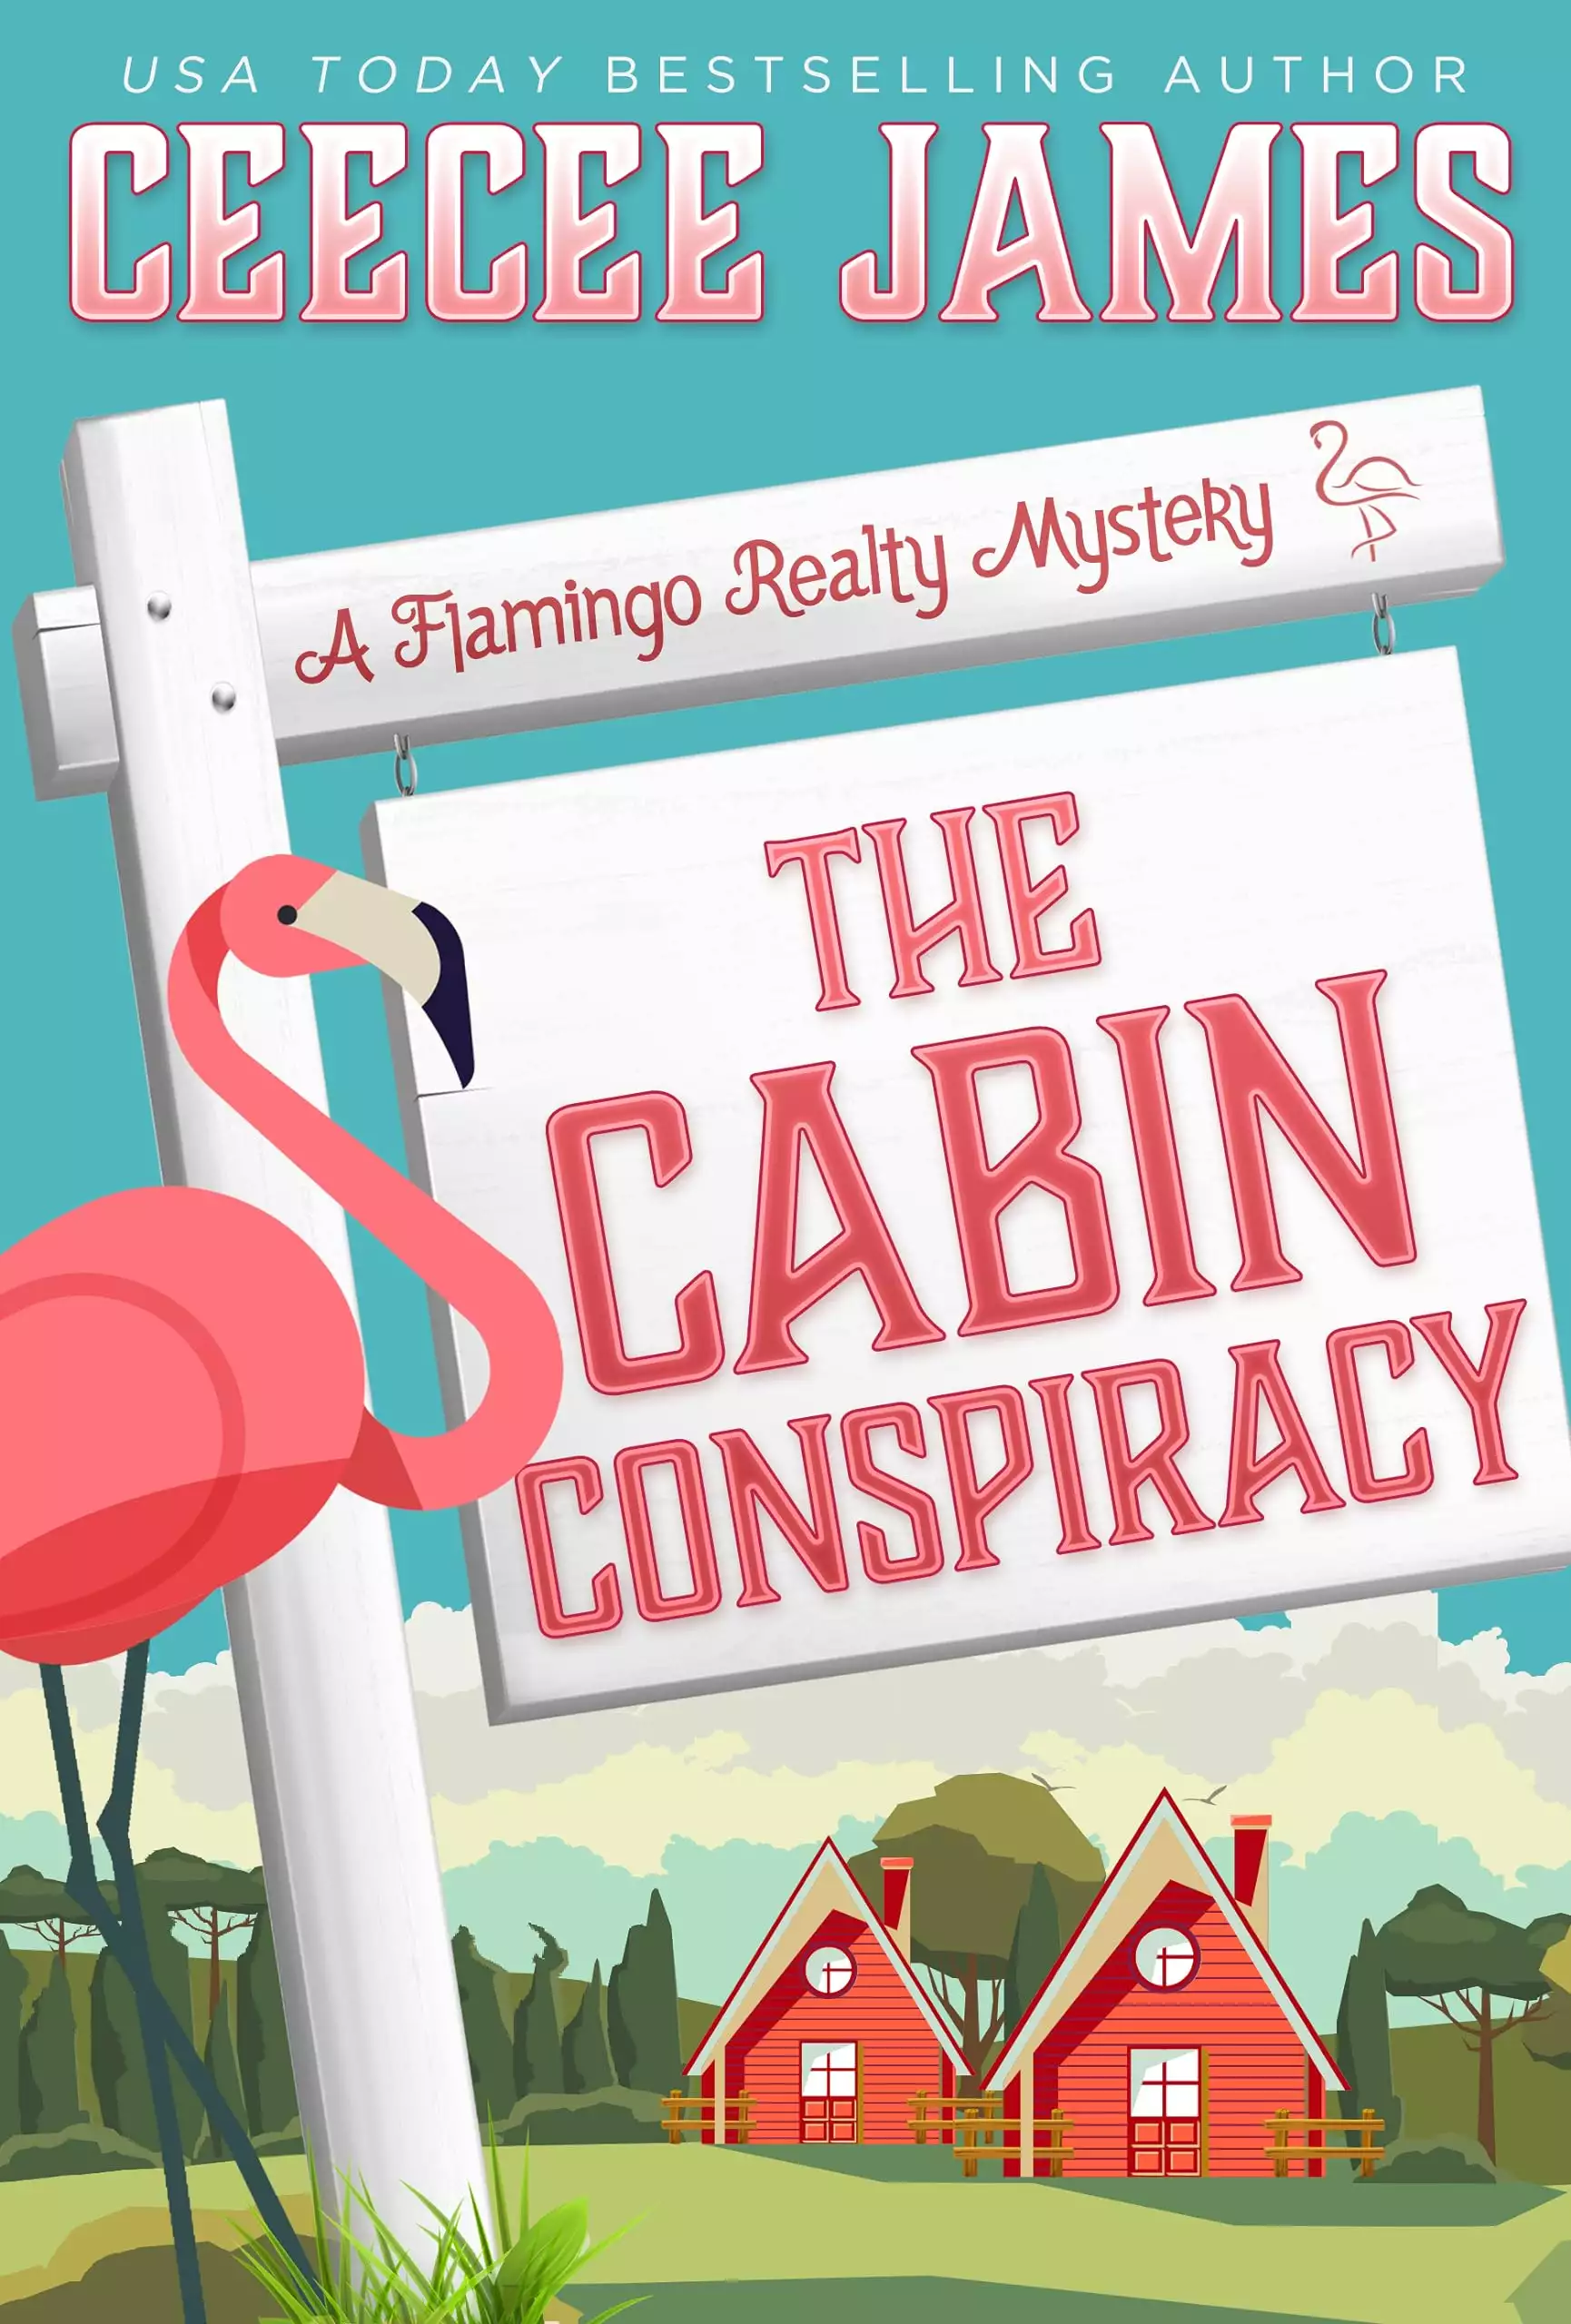 The Cabin Conspiracy